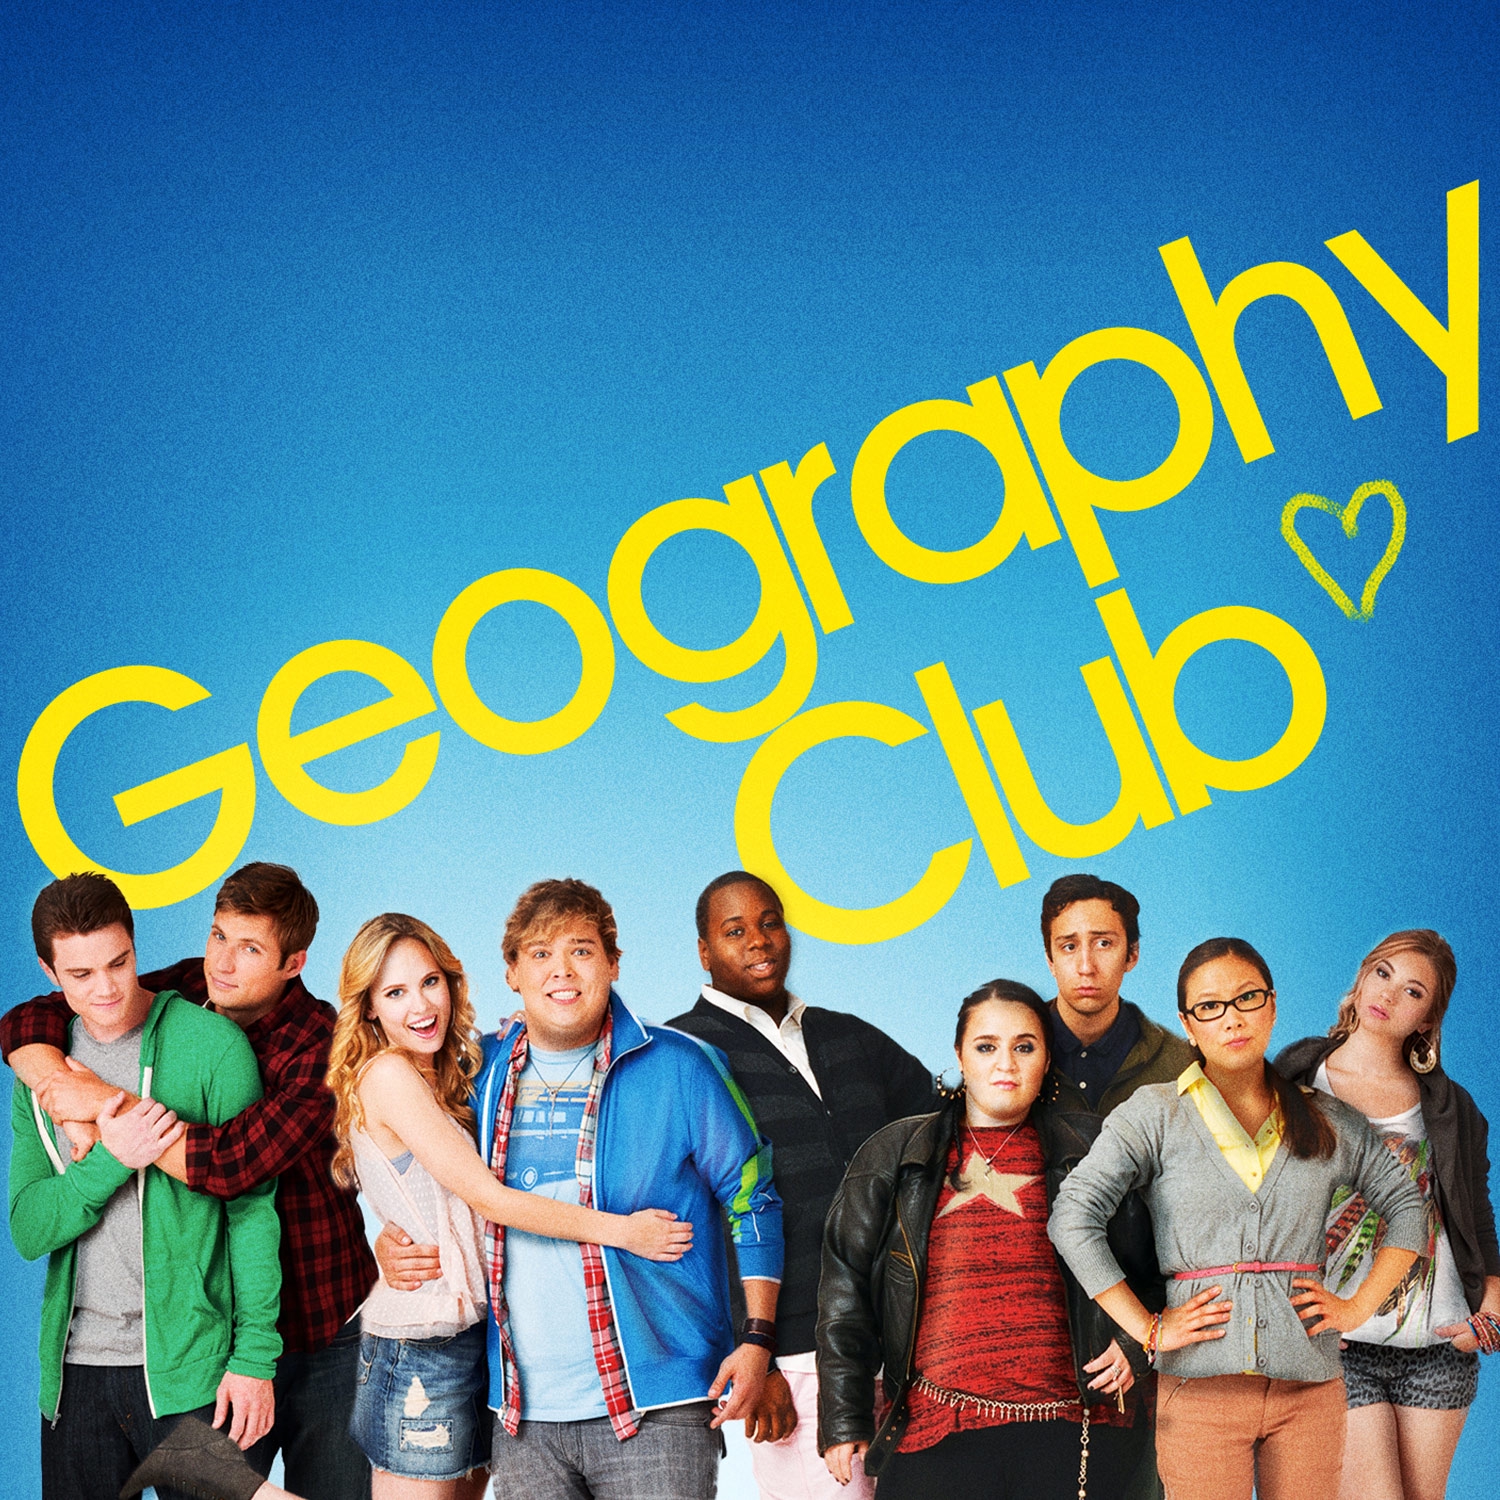 Stream Geography Club Online | Download and Watch HD Movies | Stan